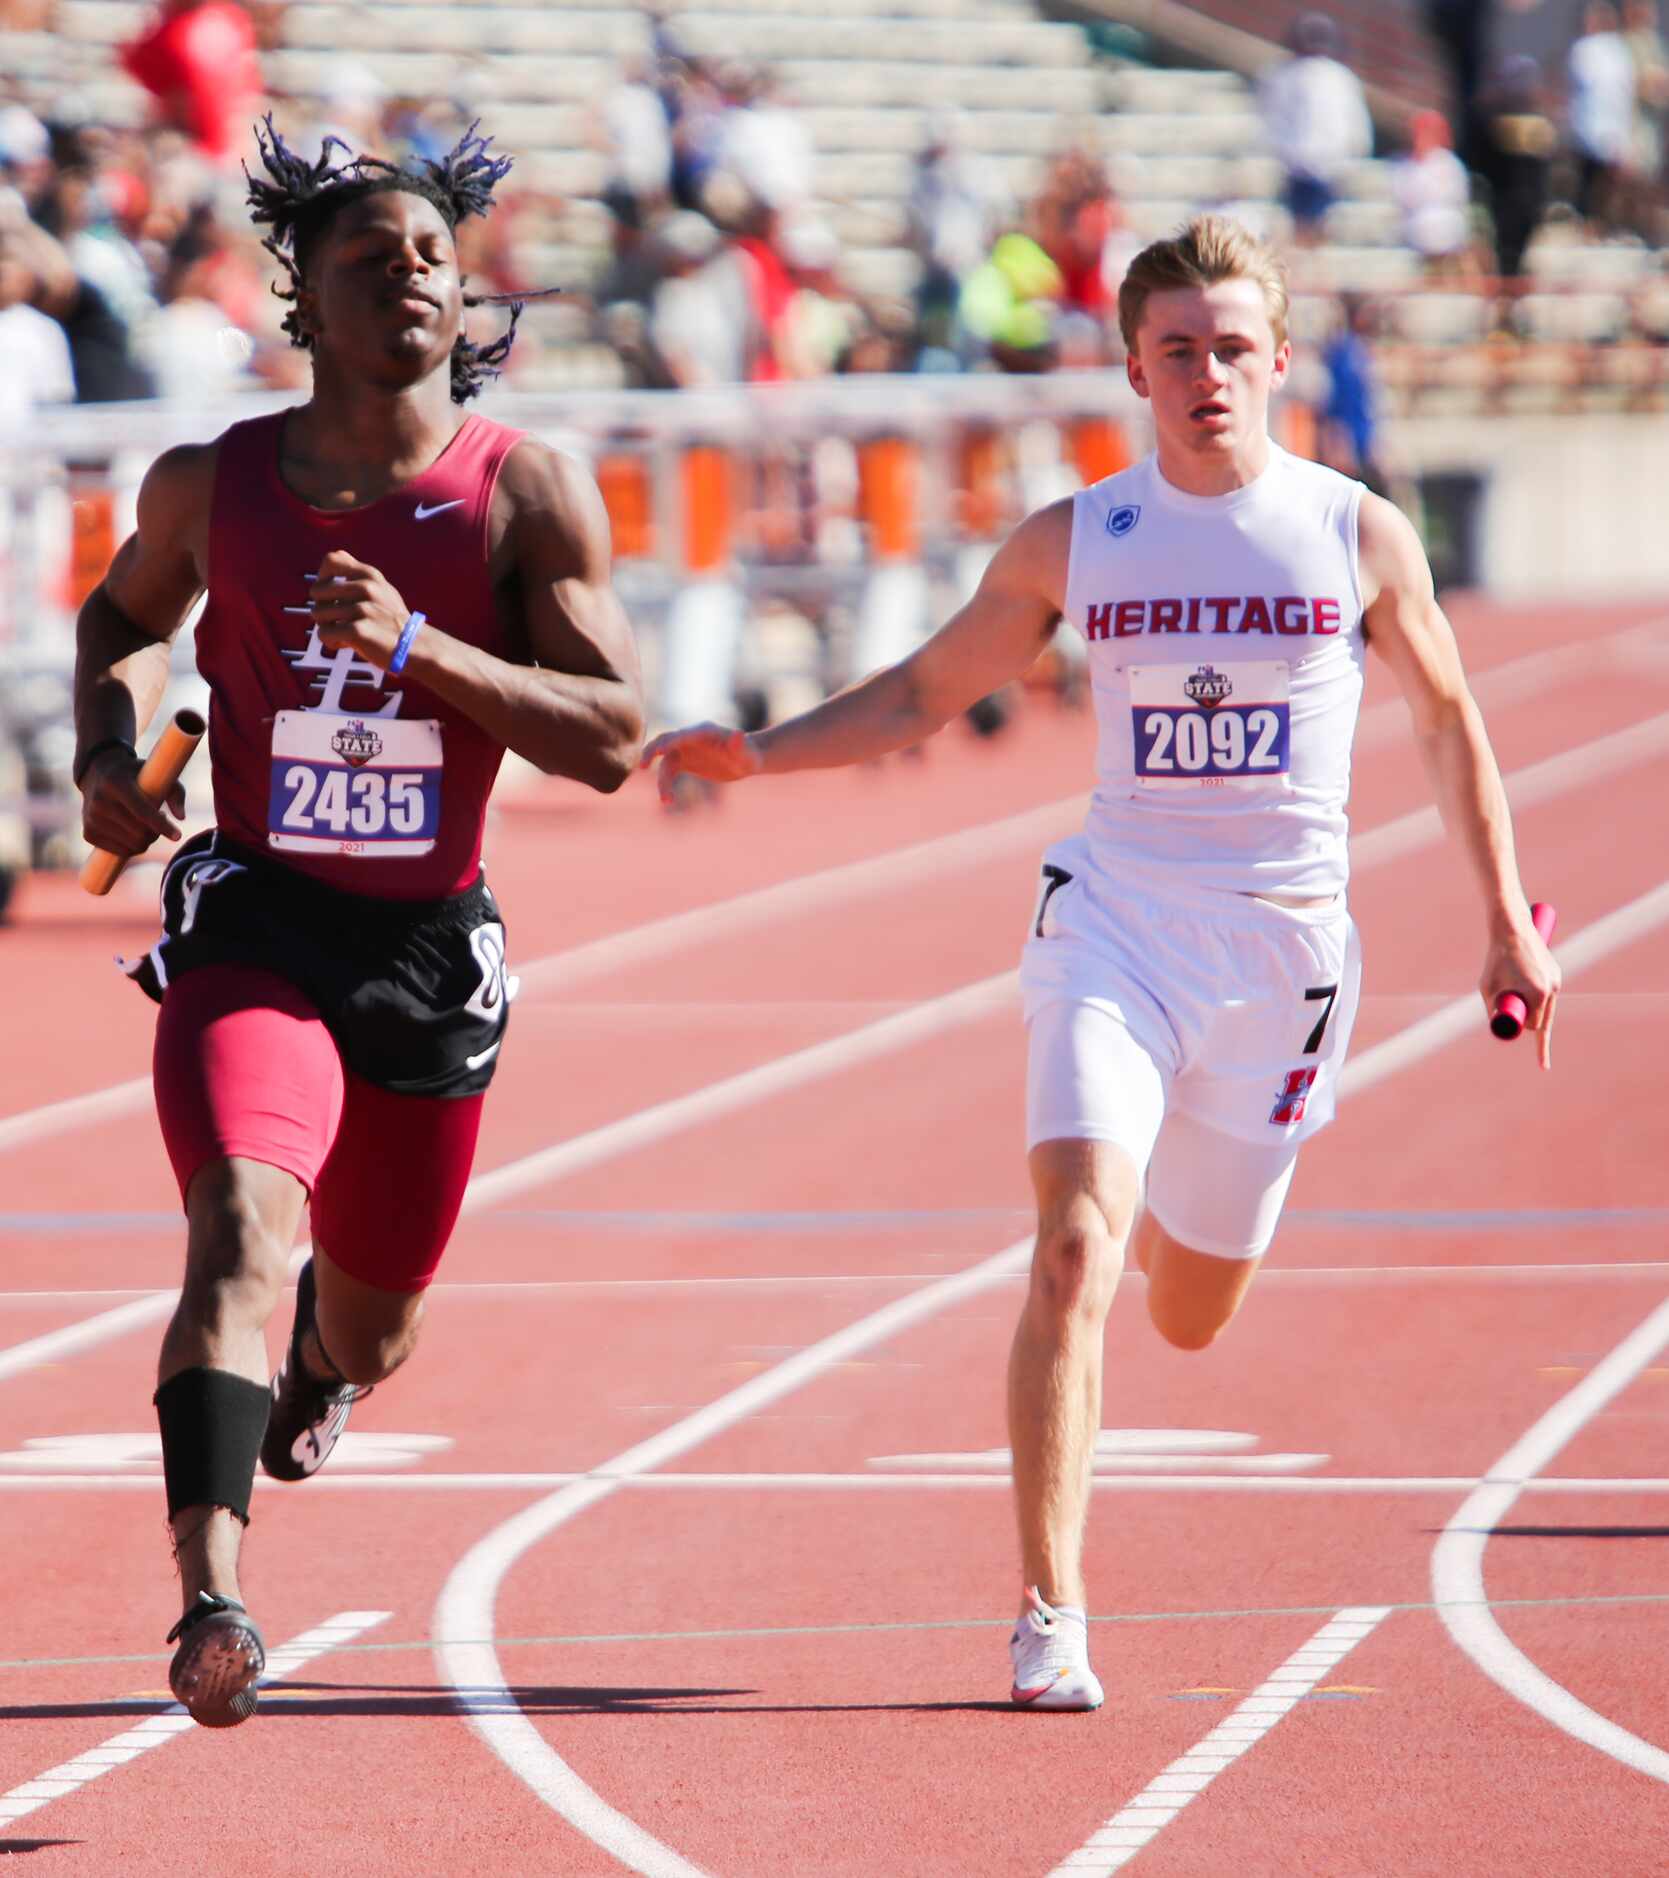 Midlothian Heritage's Carter Wilkerson was the last leg of the 4A boys 4x100 relay and...